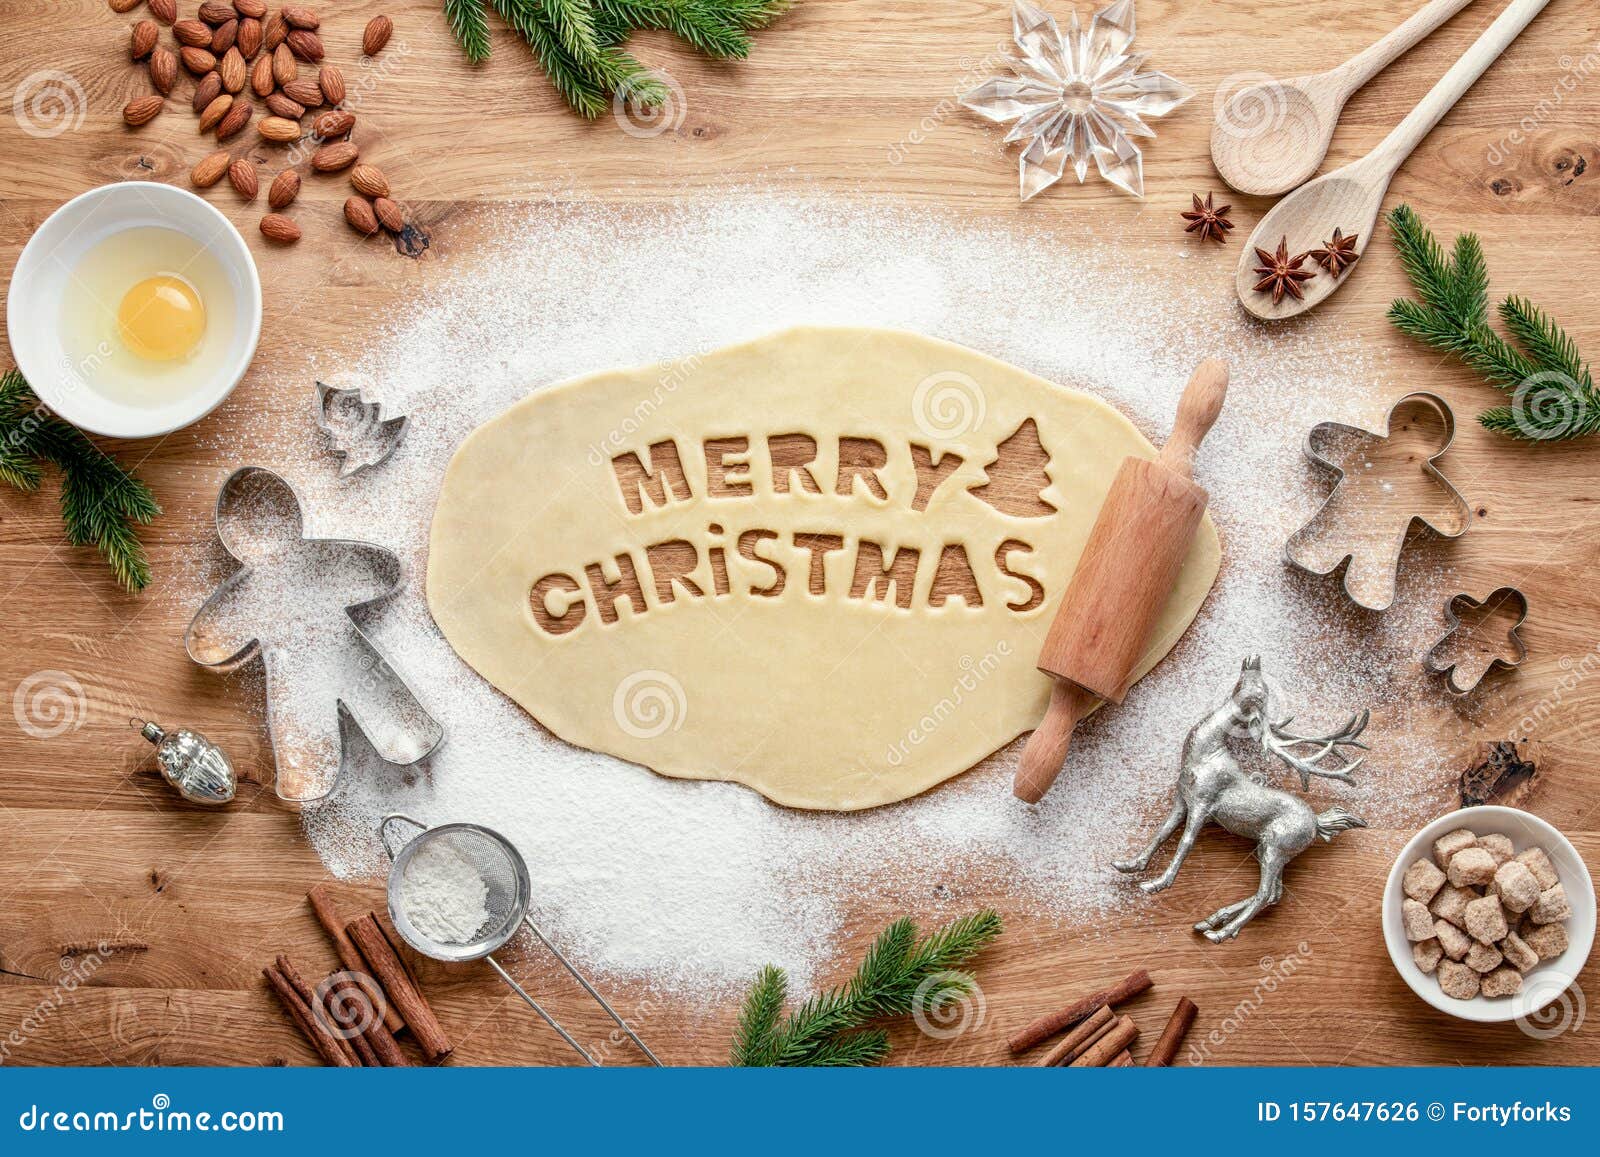 Christmas Baking Background With Greeting Text Typography Stock Photo ...